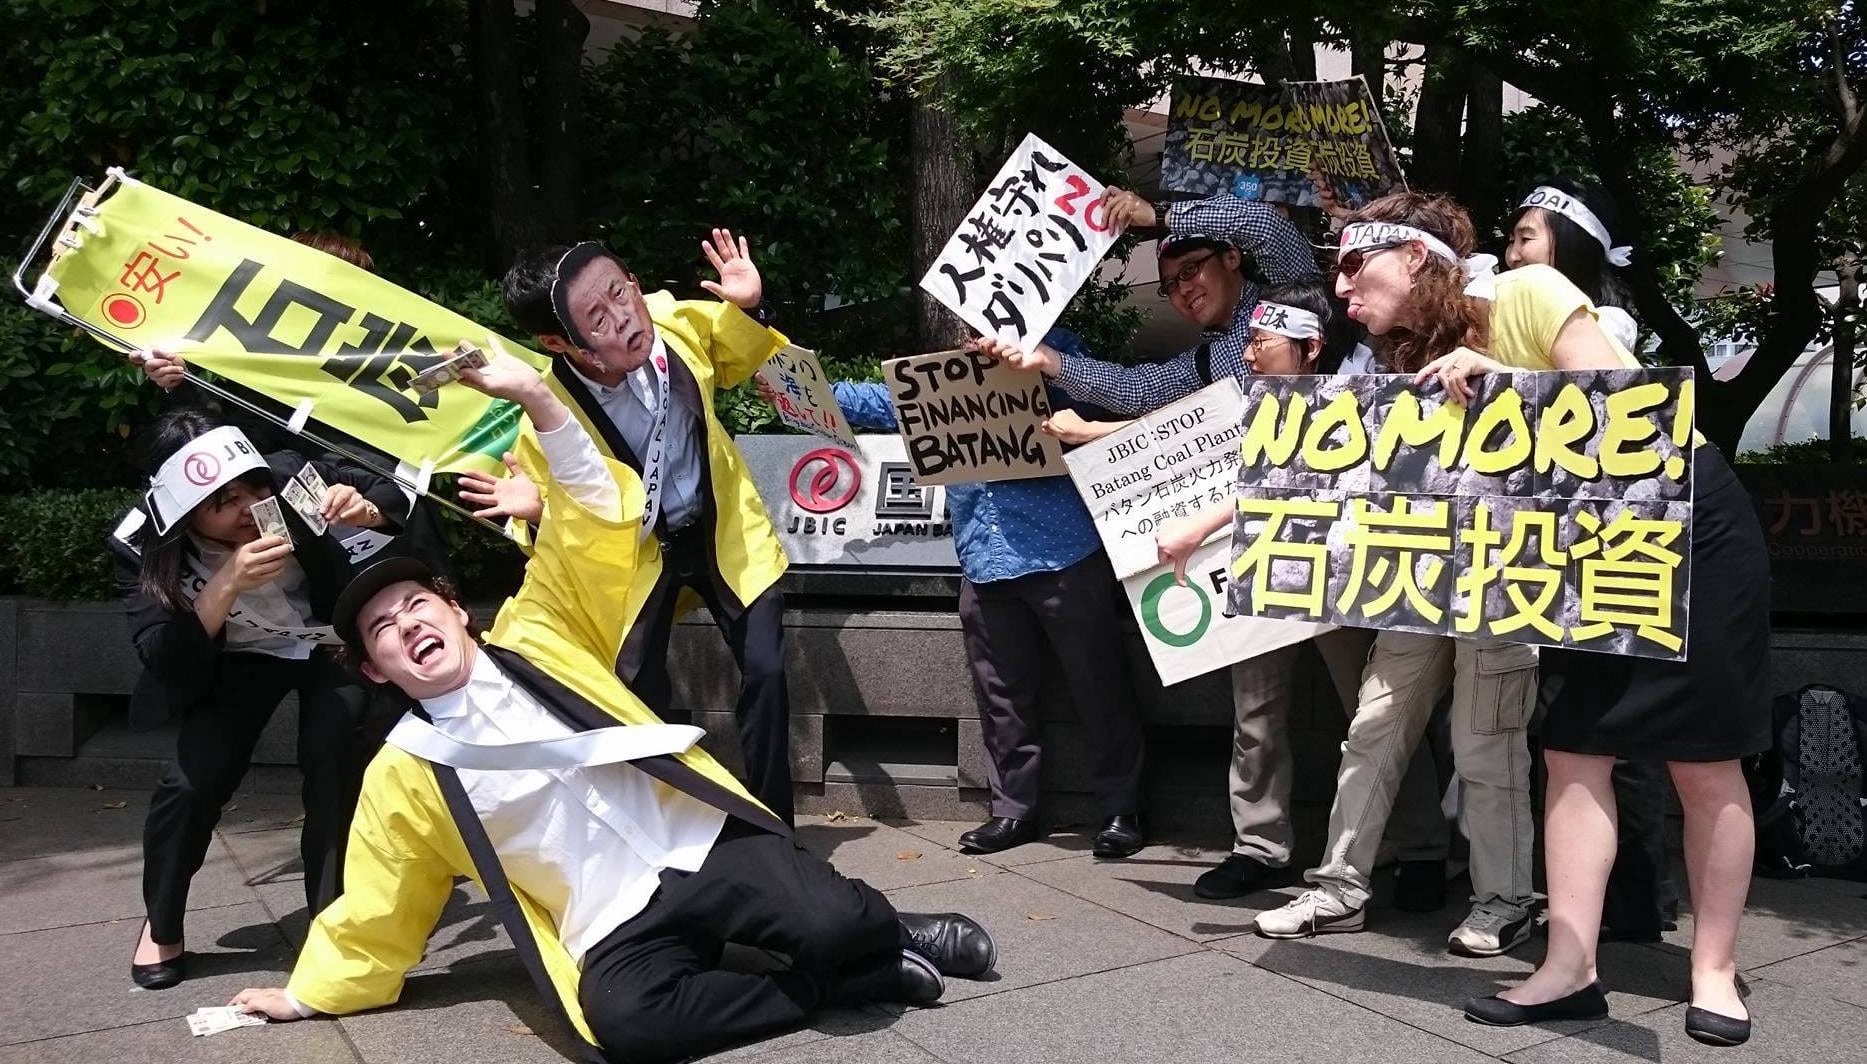 Despite protests, Japan gives lifeline to dangerous fossil fuel projects